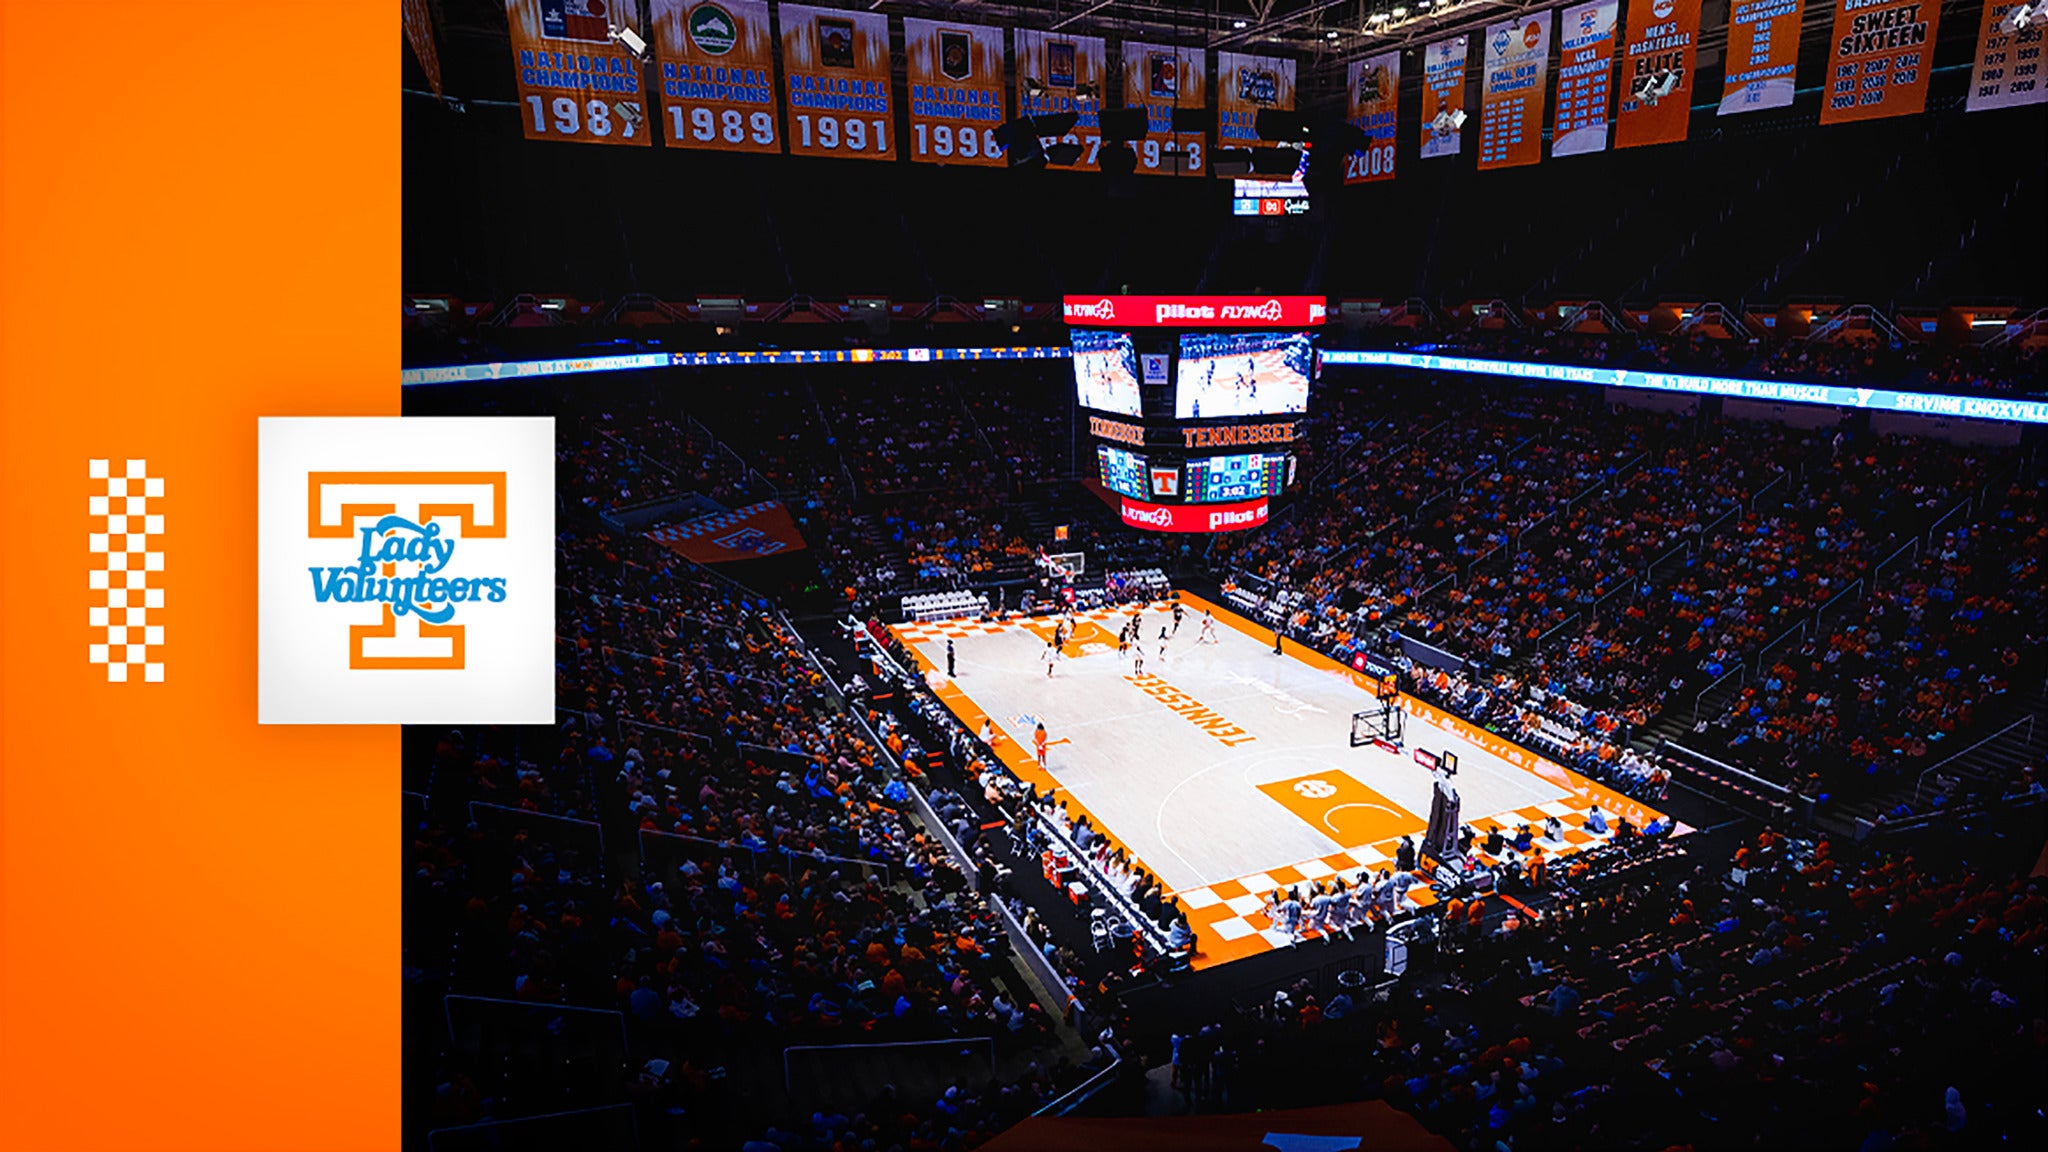 Lady Vol Basketball vs. USA Basketball Women's National Team presale code for advance tickets in Knoxville